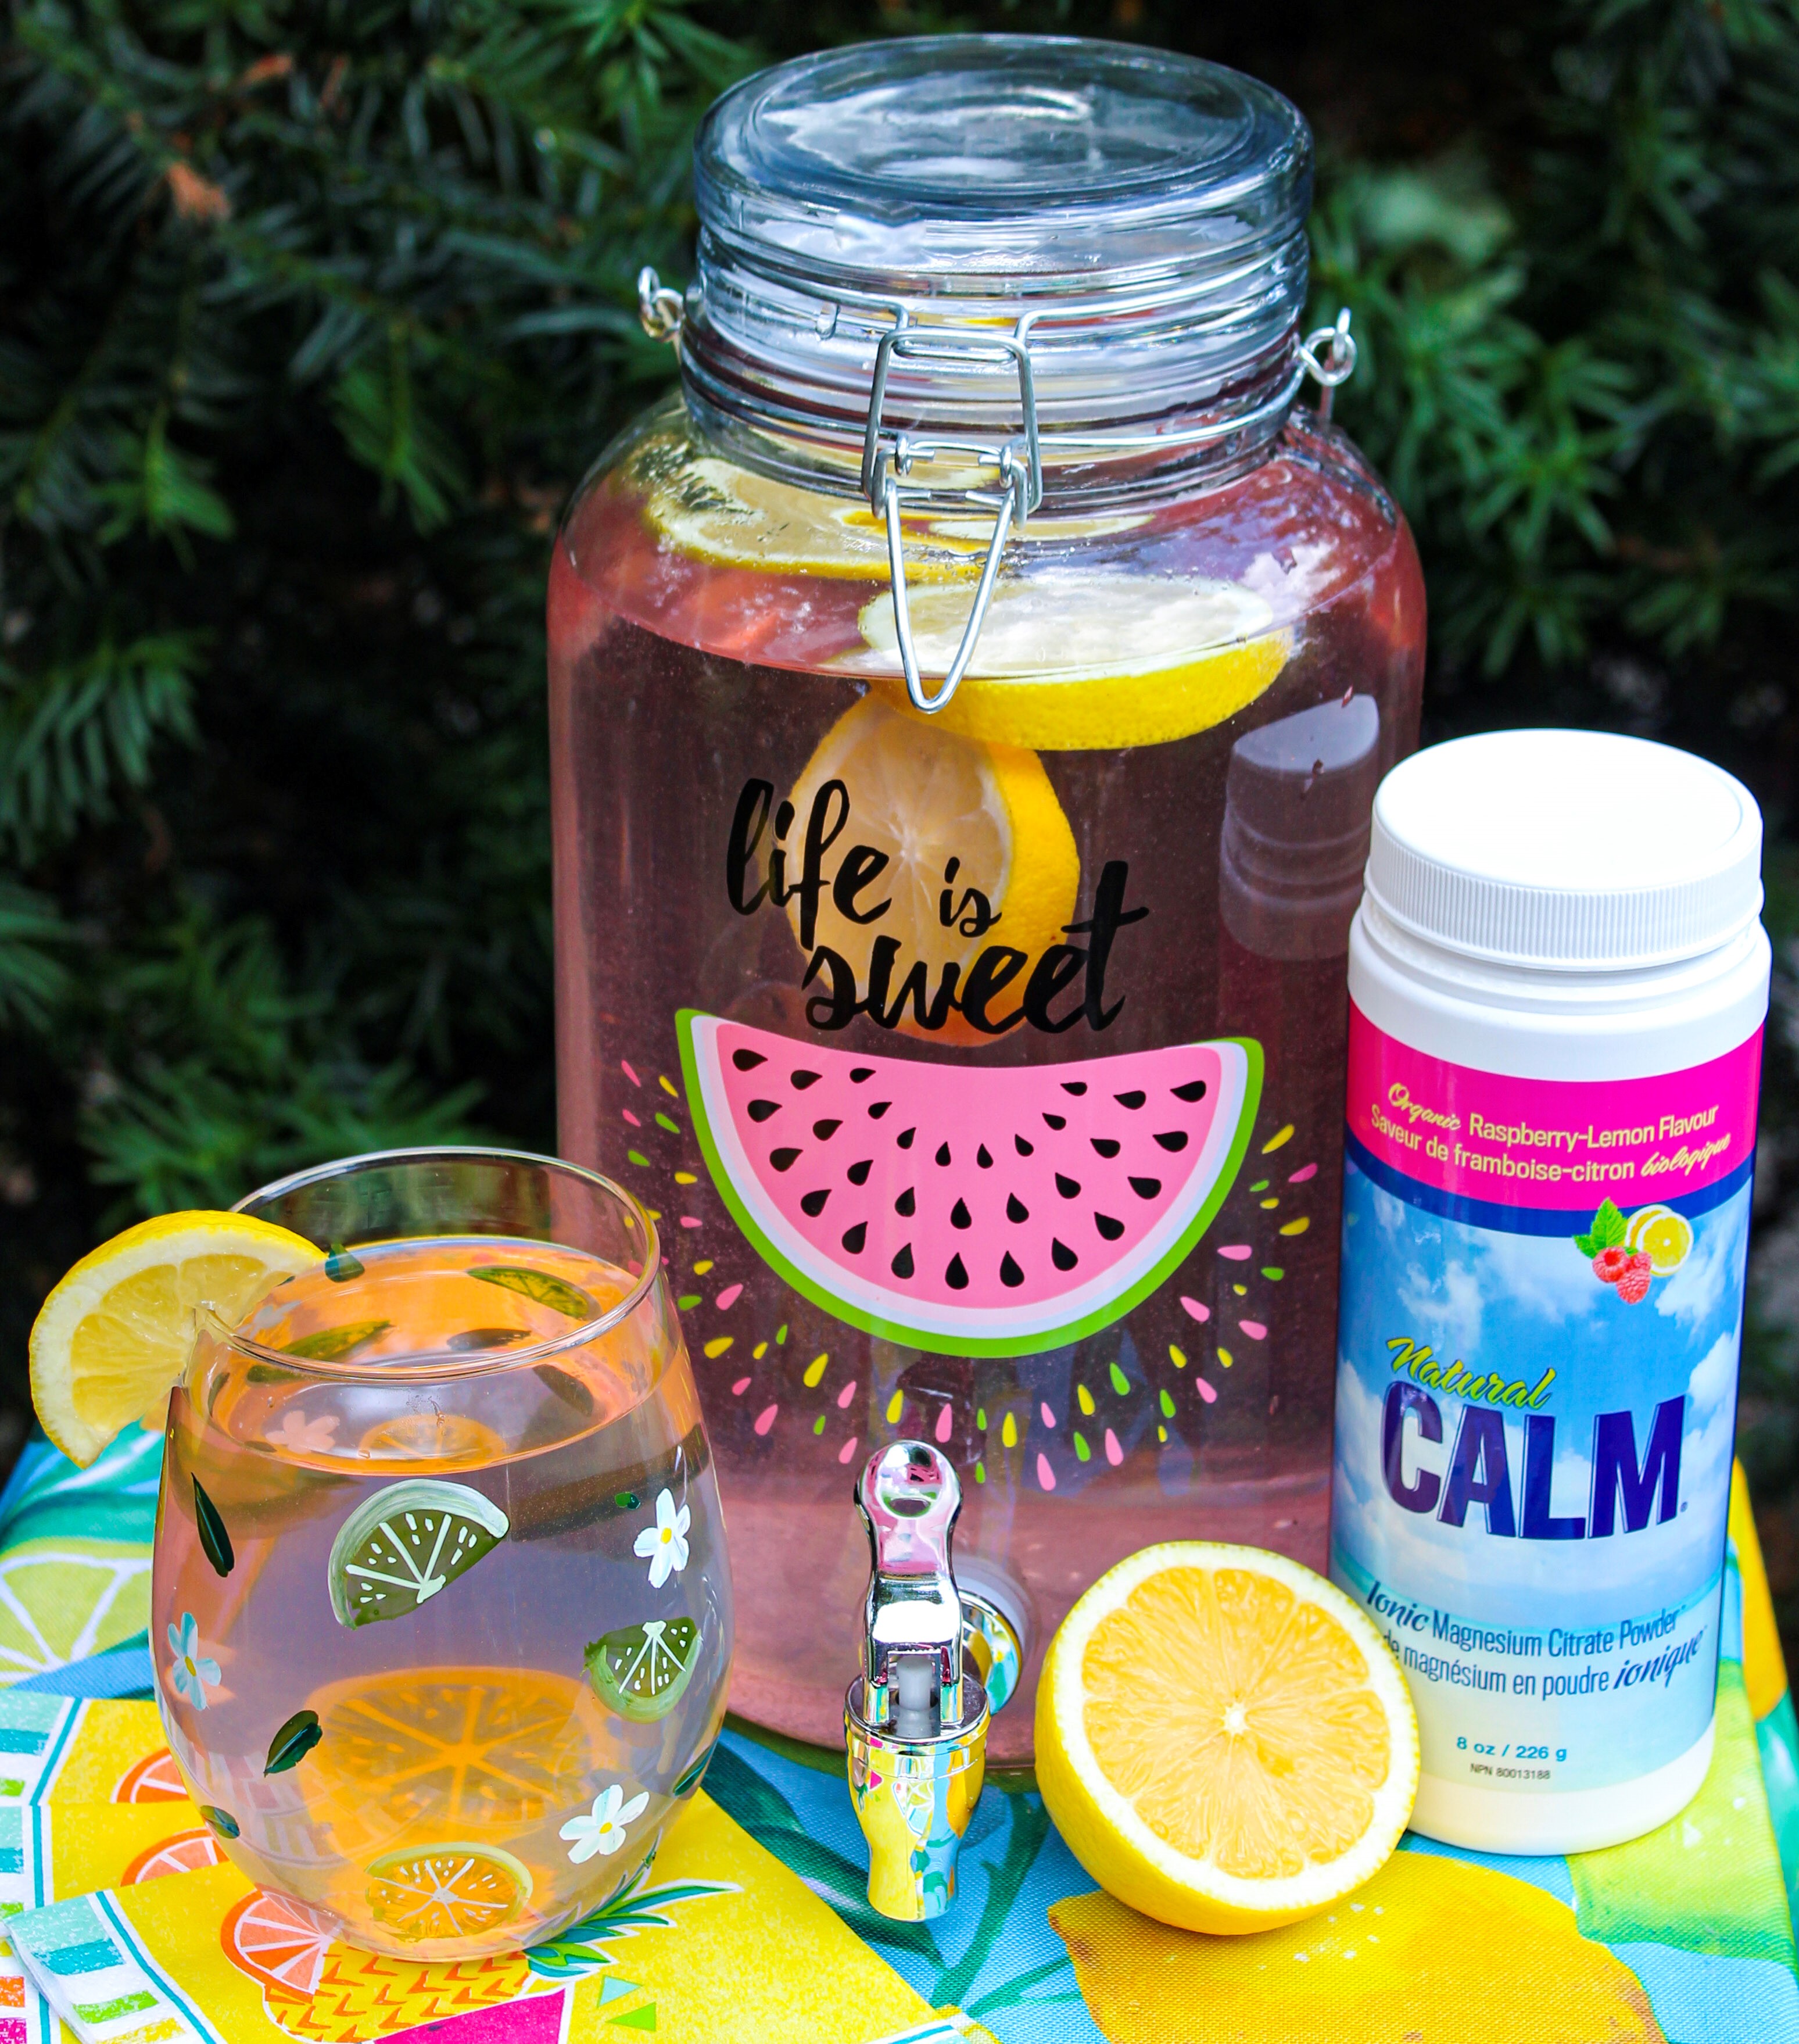 Manage Stress with Natural Calm Magnesium Iced Tea